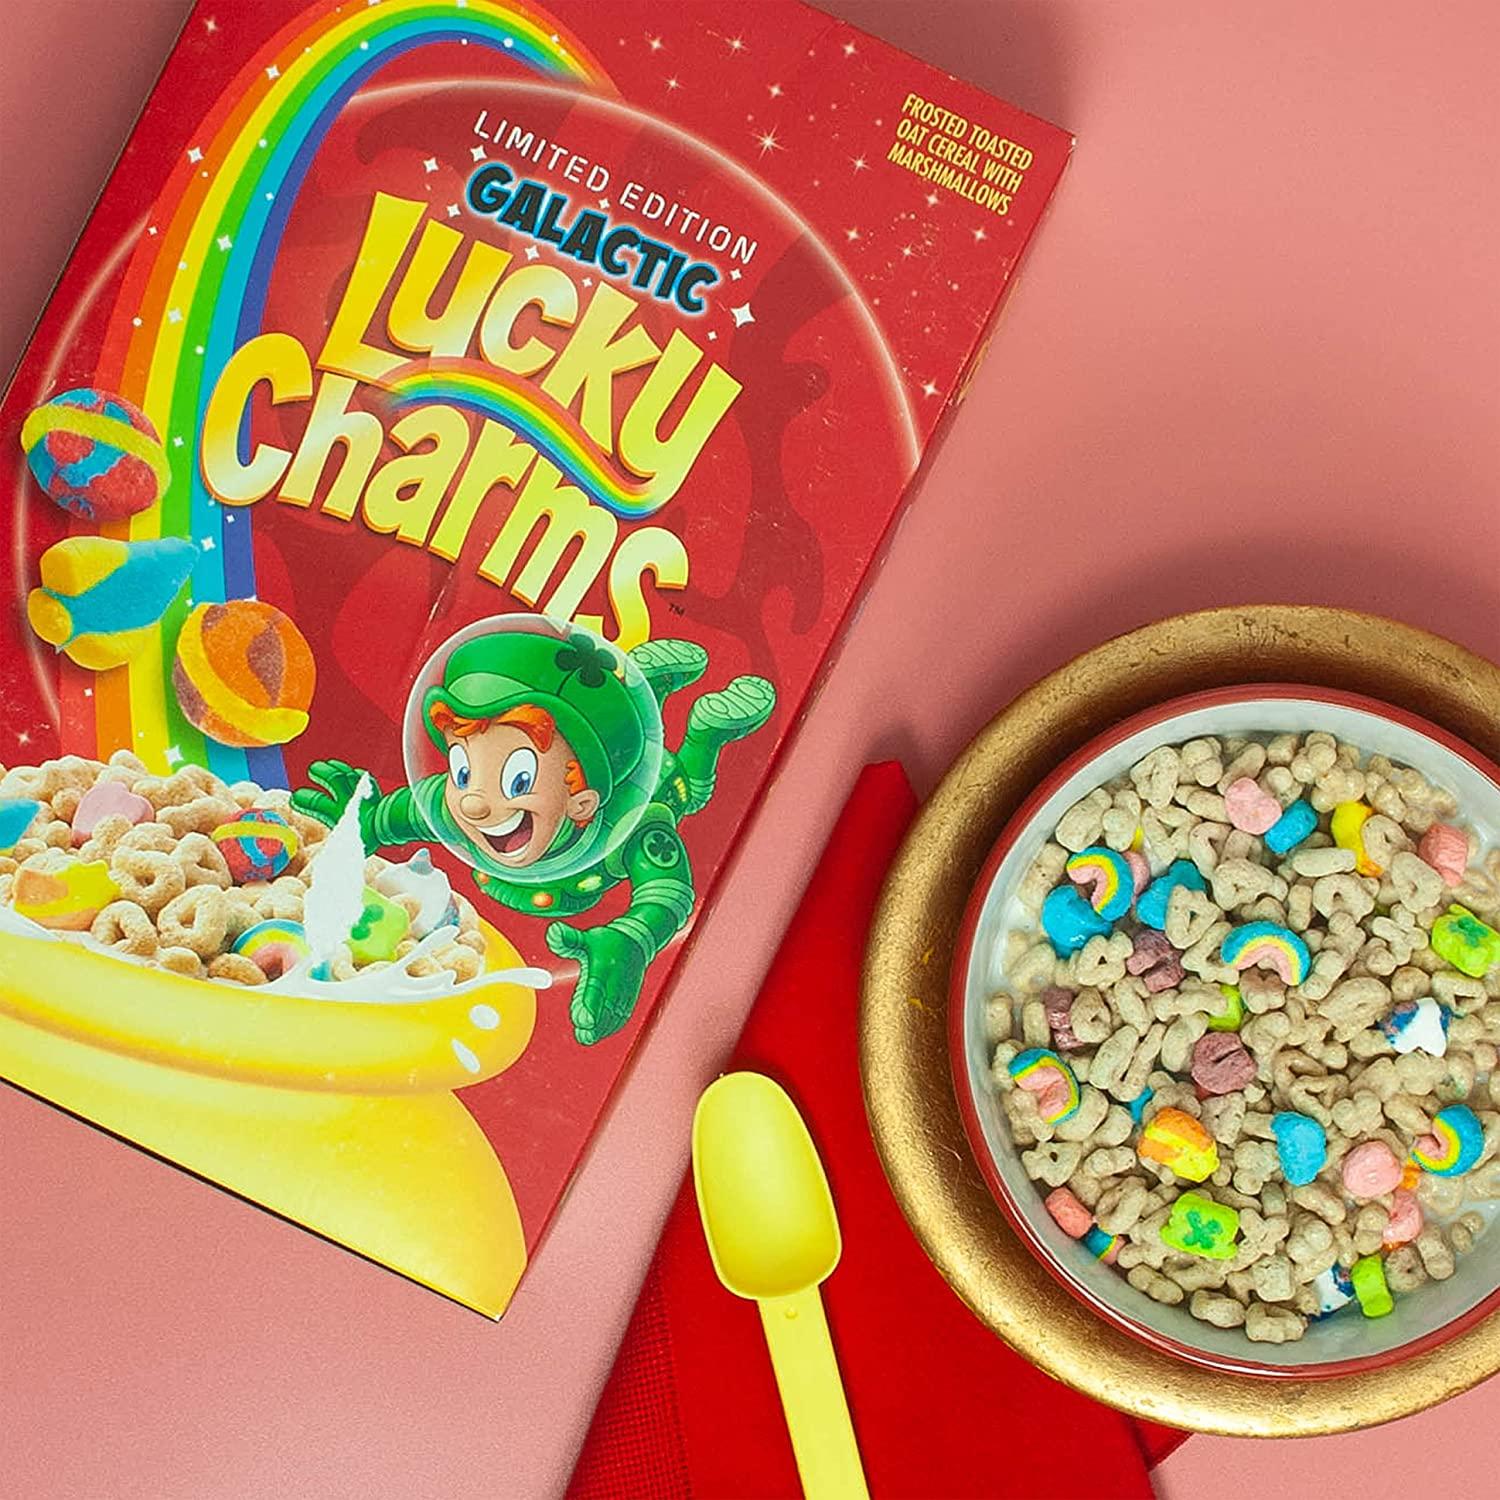 General Mills Lucky Charms Cereal, 60 ct / 1.7 oz - Foods Co.